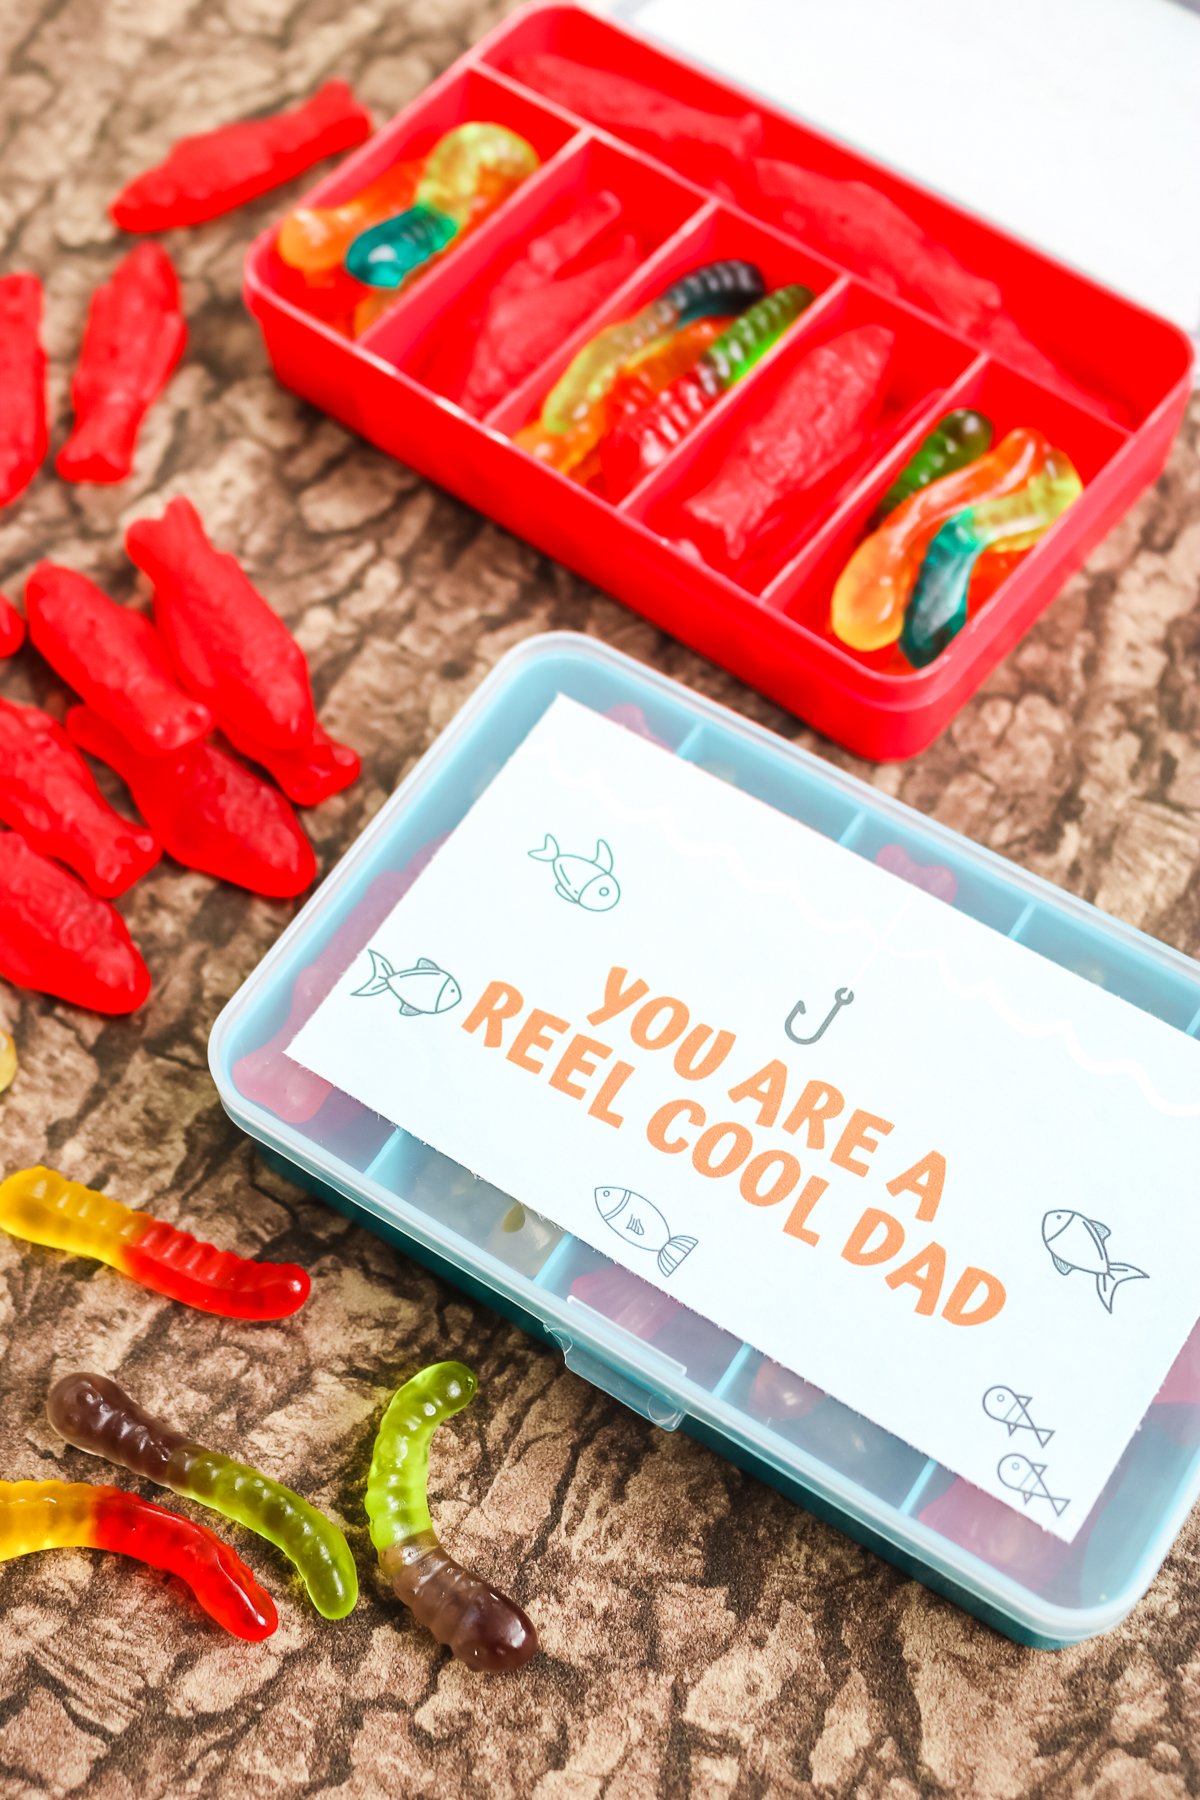 DIY Father's Day Gifts For Dad You Can Make In 1 Hour Or Less ⋆ Hello Sewing